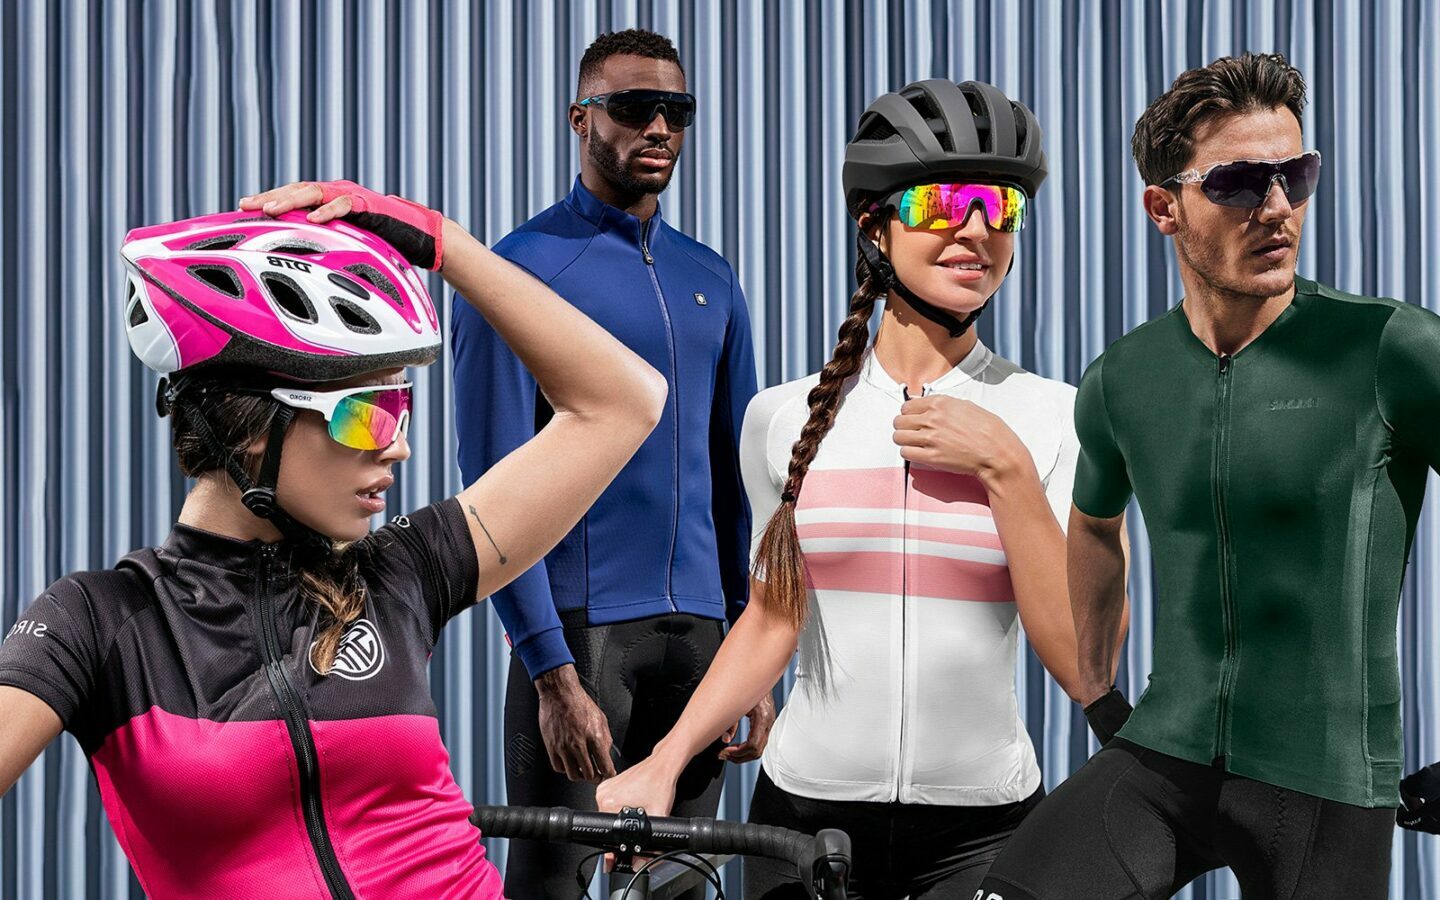 Cycling Glasses - Polarized/Color Changing